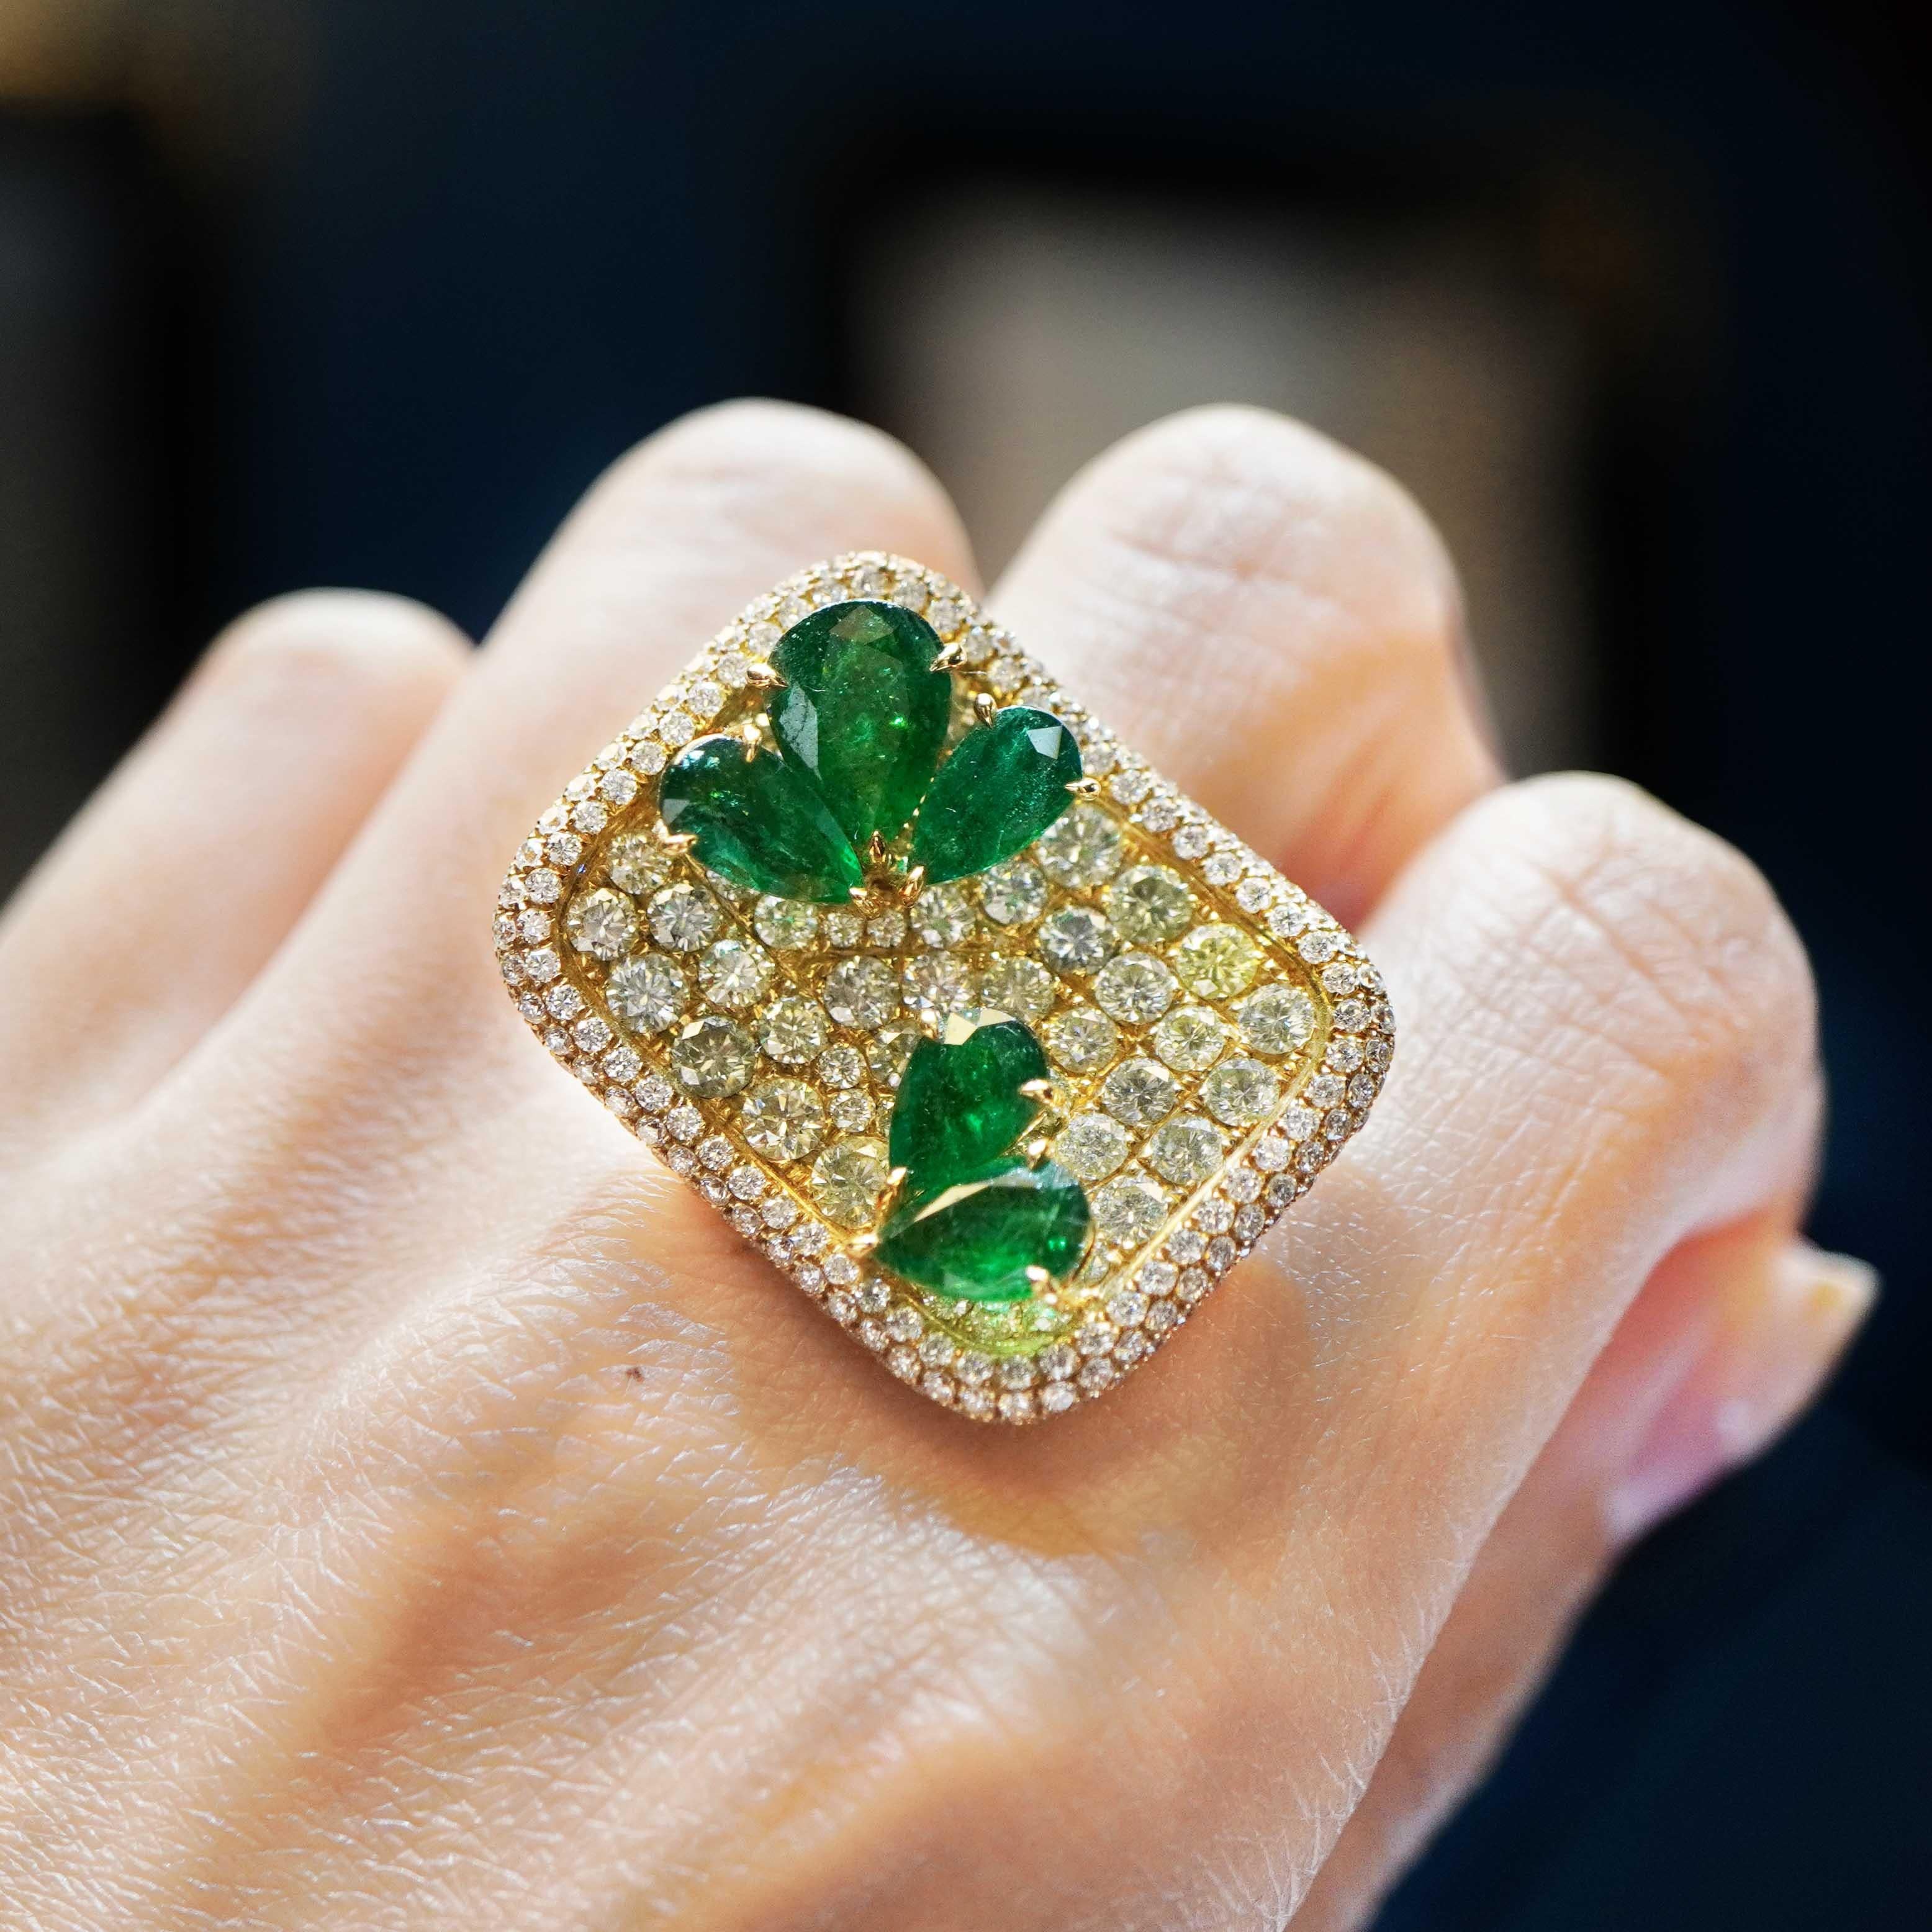 4.17 carat of vivid green Colombian emerald are set along with 4.33 carat of natural fancy color diamond in this Garden Inspired ring. The ring is a spectacular combination of vivid green emerald and mix color natural fancy color round brilliant